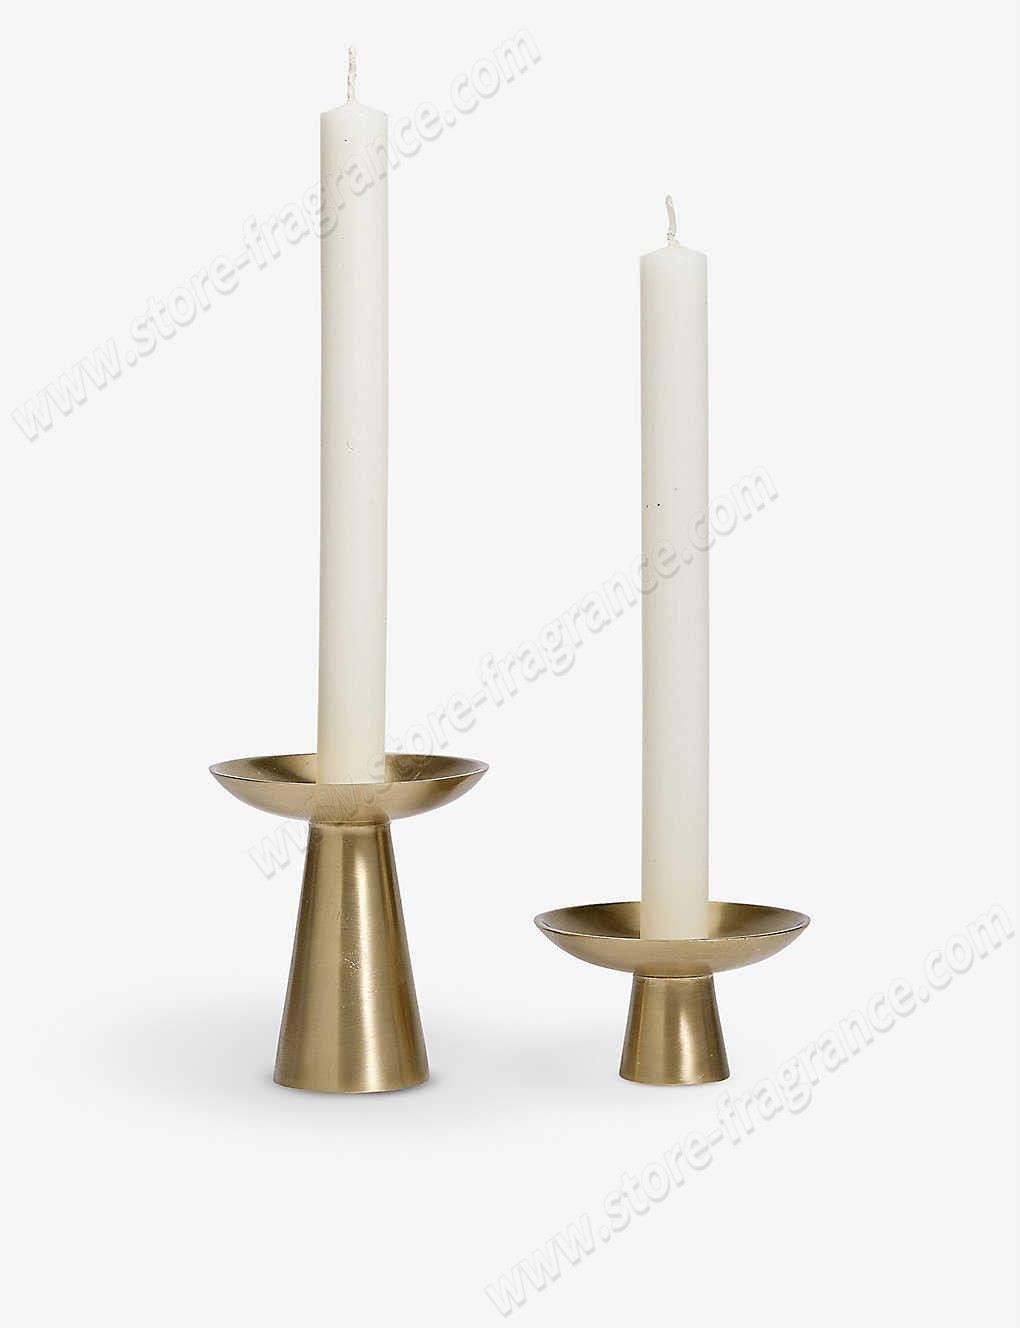 SOHO HOME/Marlton brushed brass candle holders set of two Limit Offer - -1